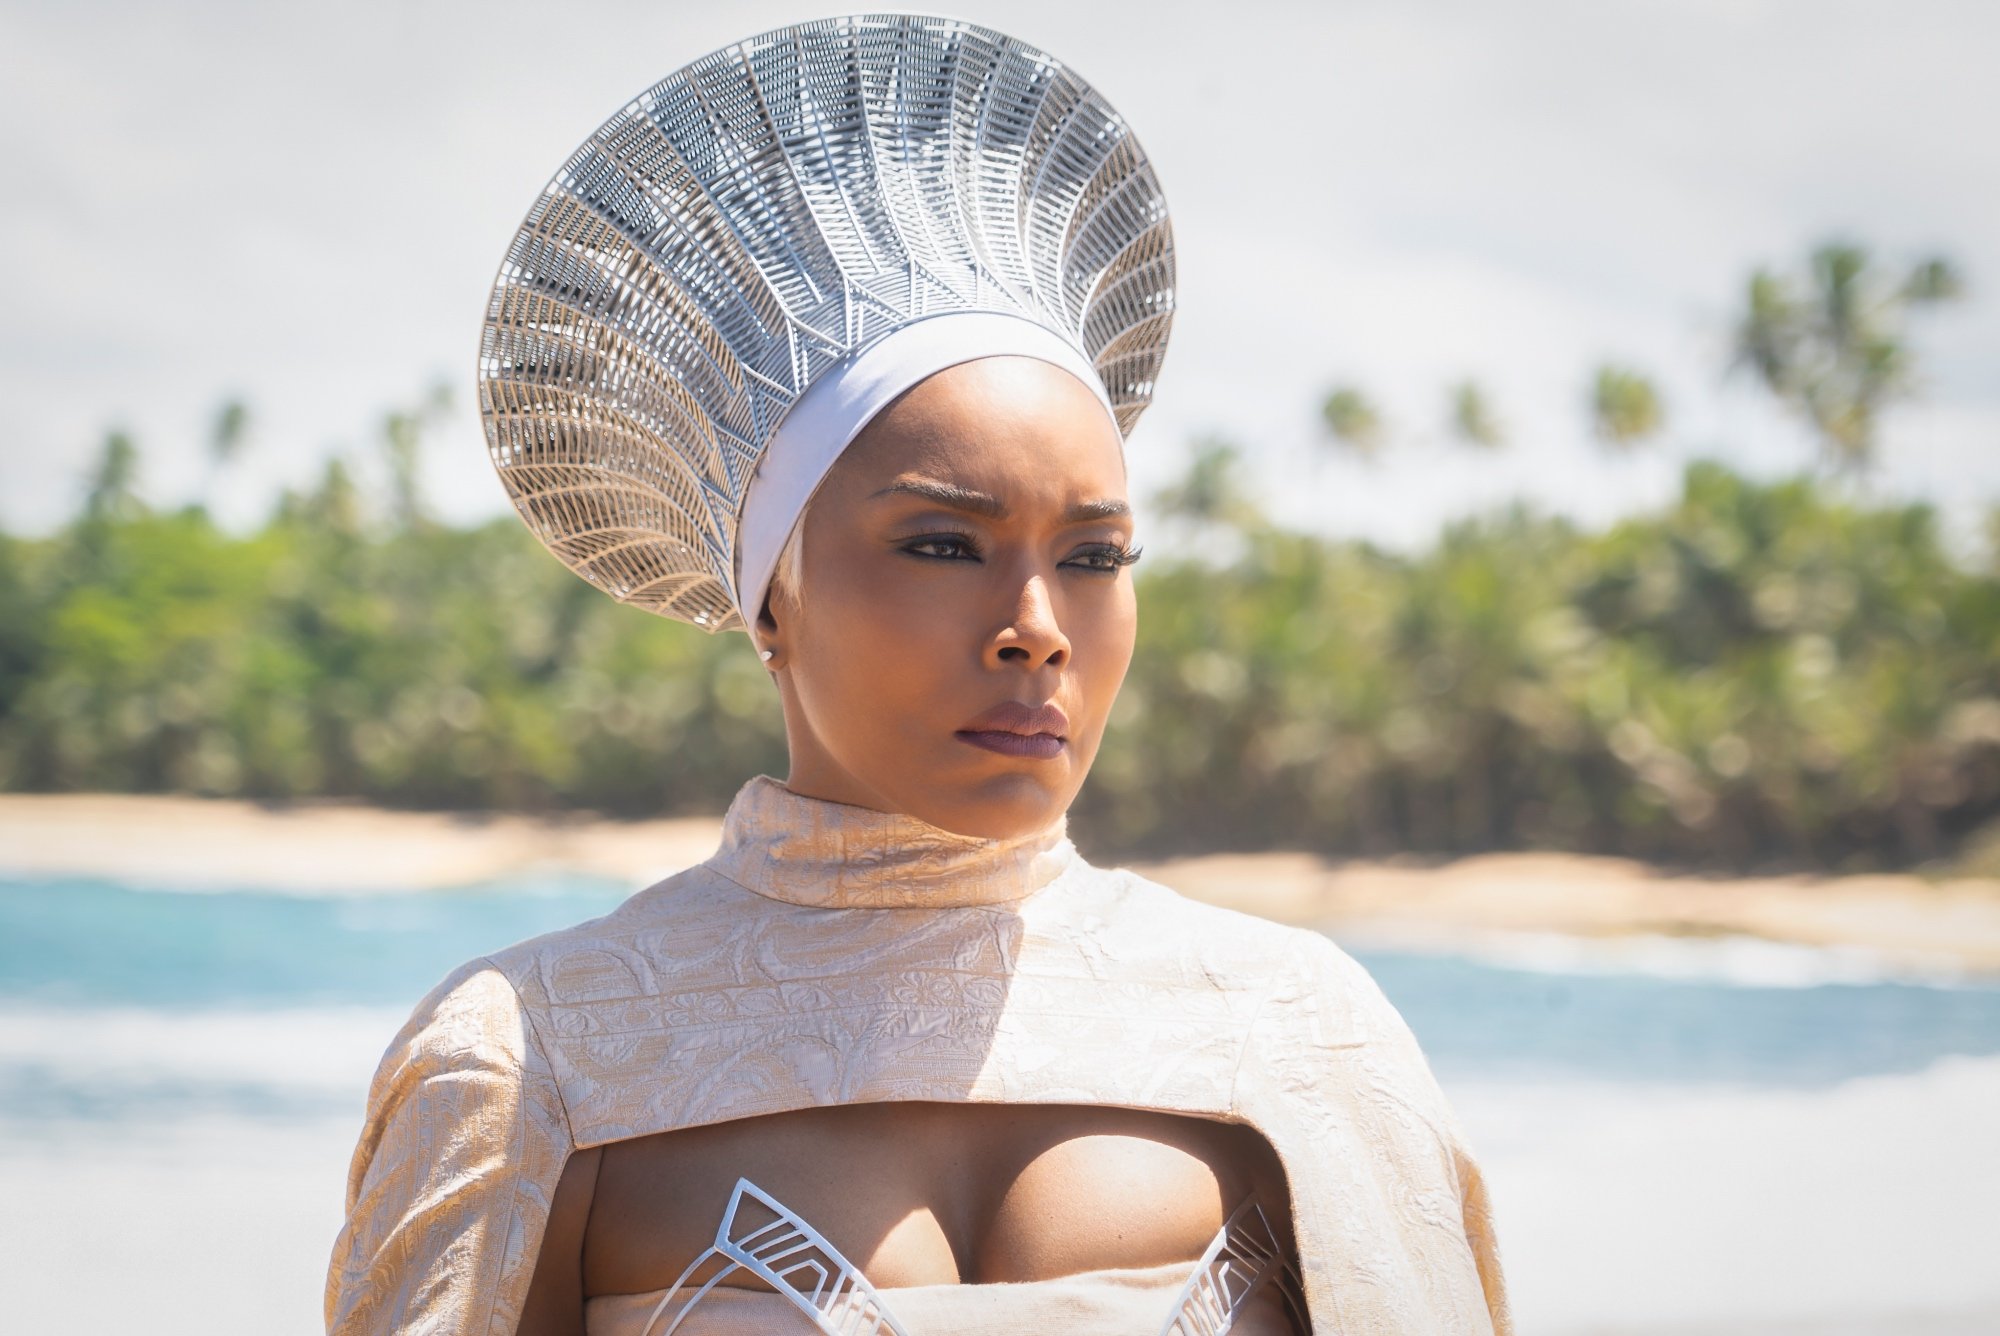 'Black Panther: Wakanda Forever' Angela Bassett as Ramonda wearing all-white and a headpiece in front of the ocean